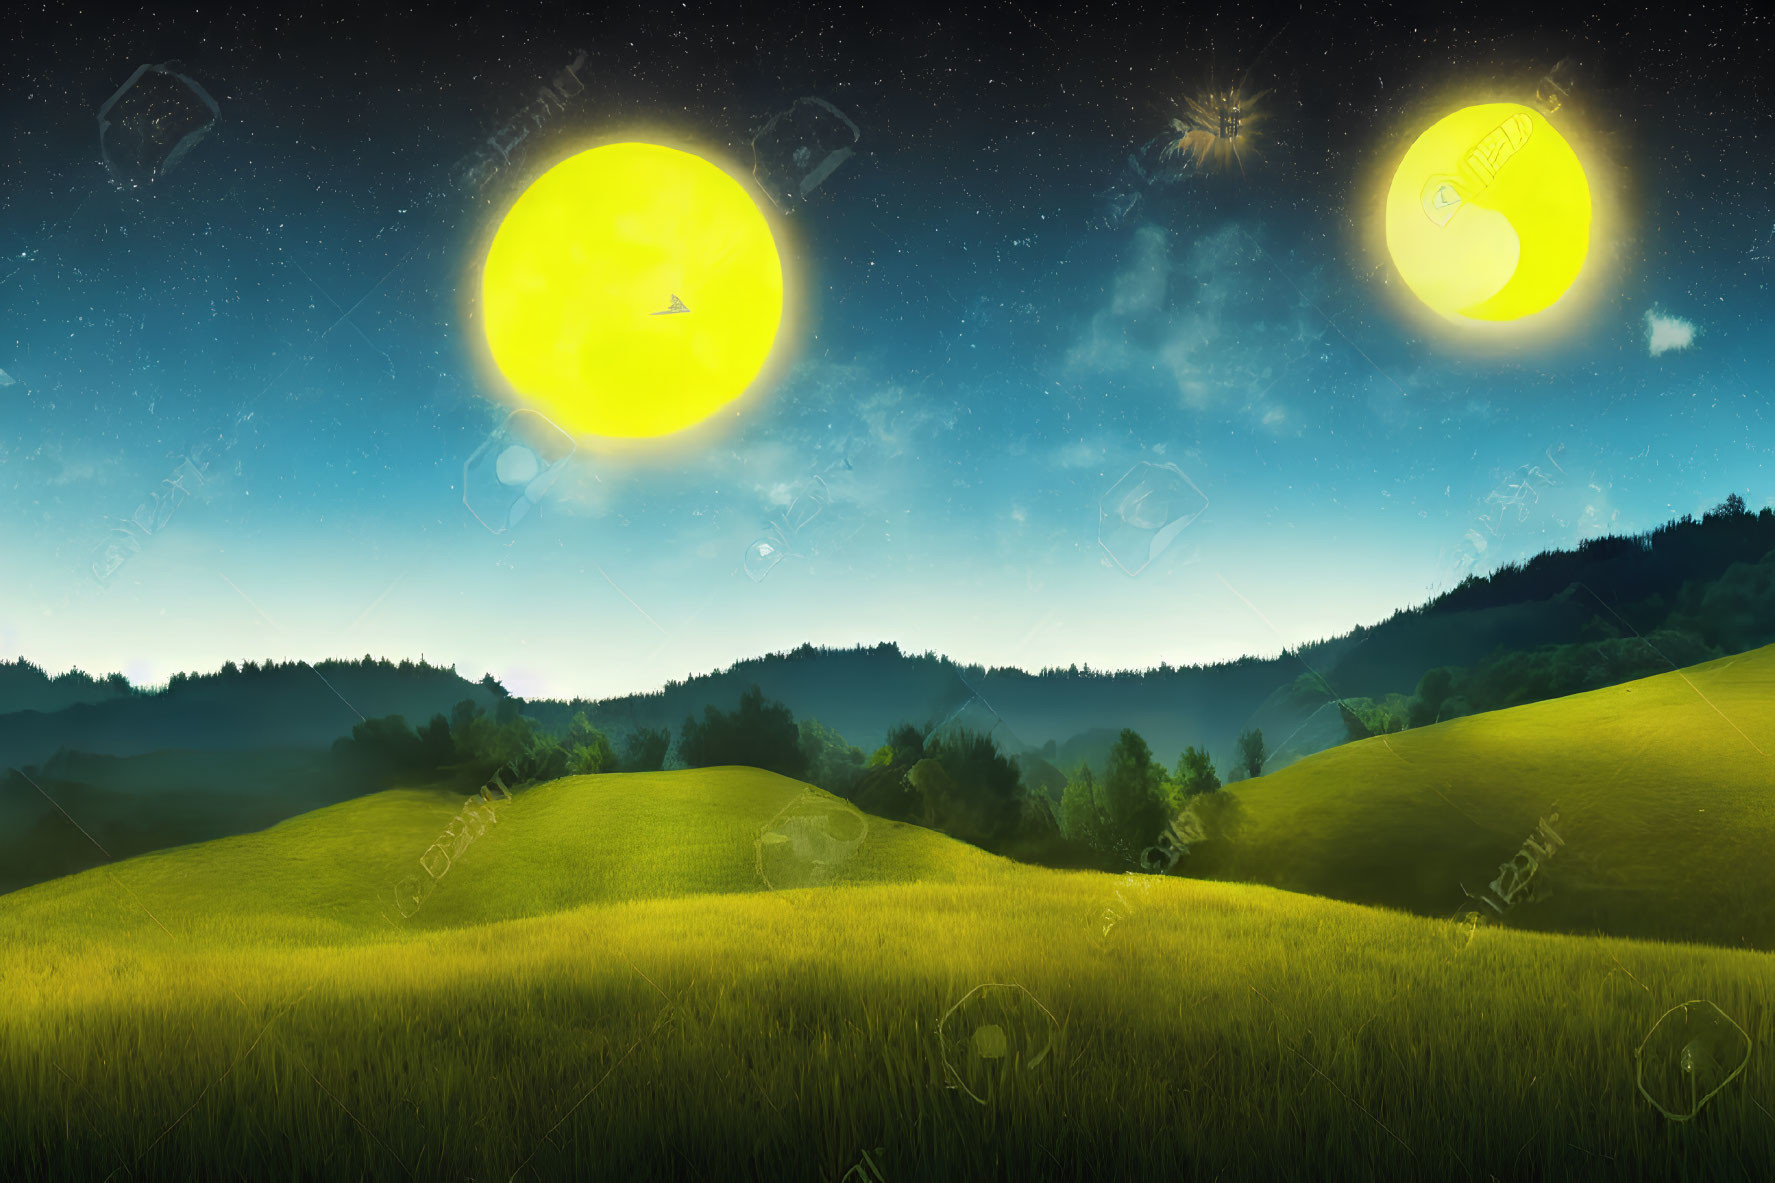 Surreal landscape with two yellow moons, starry sky, green hills, and dark forest.